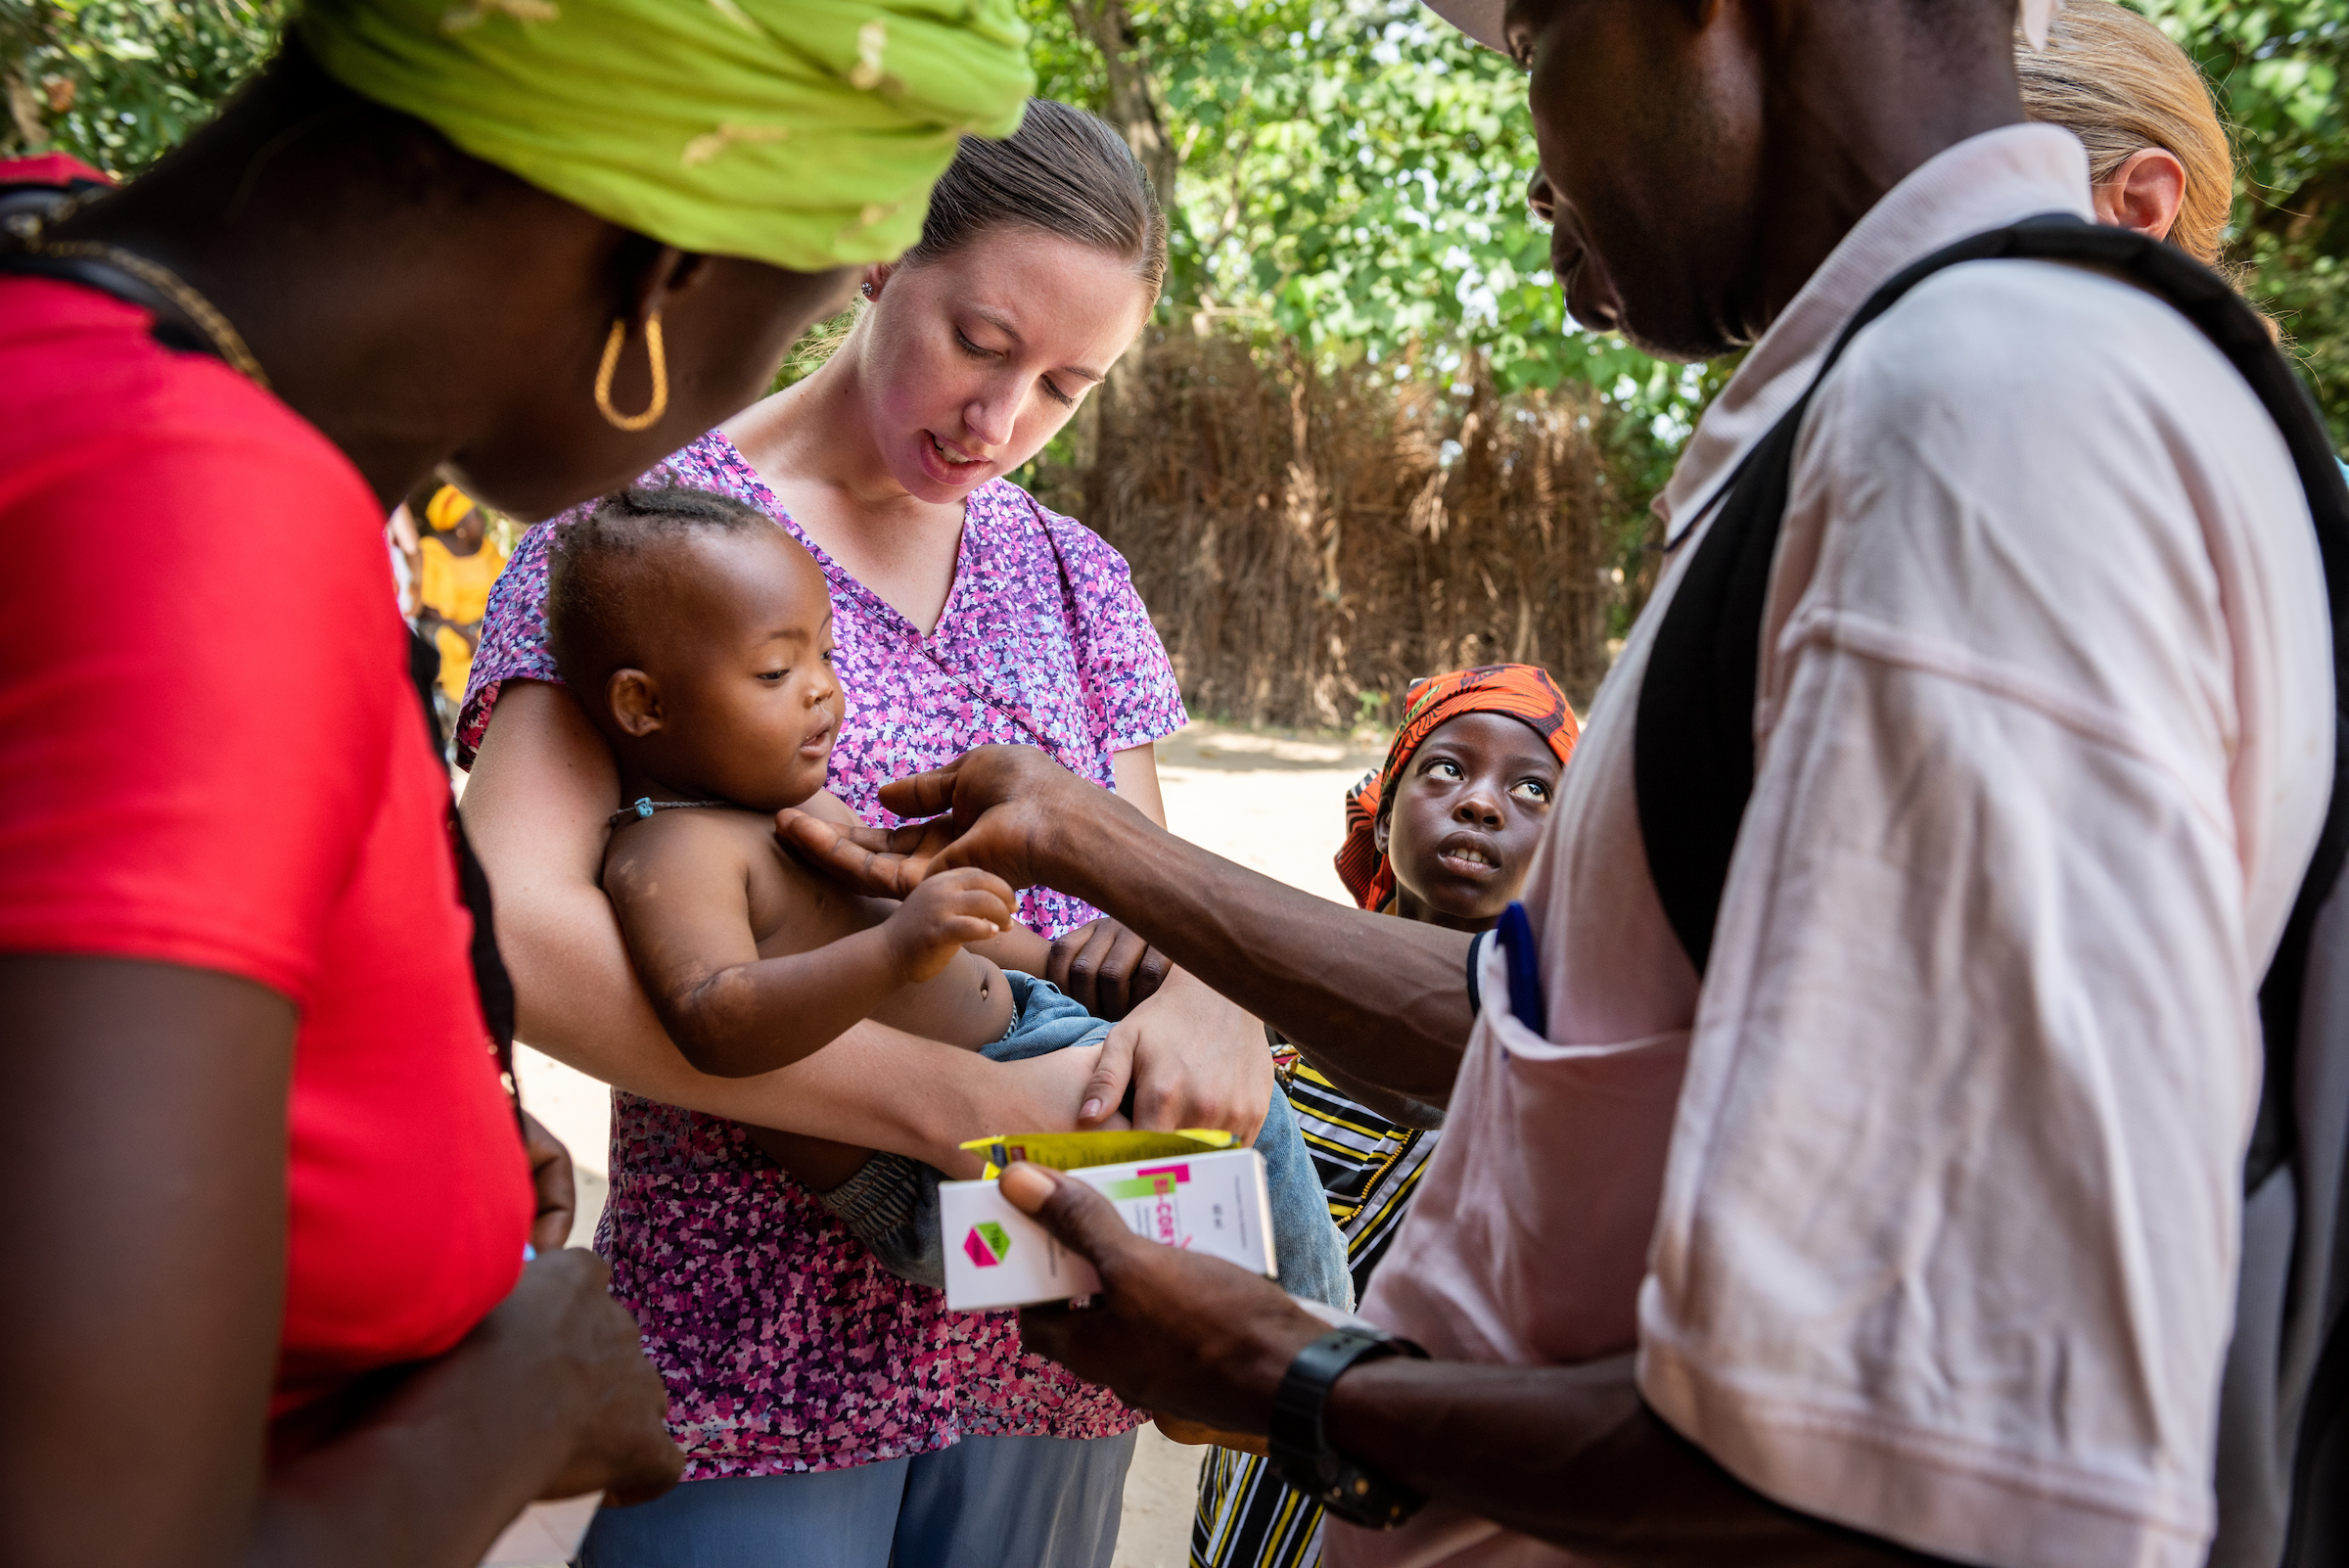 Molly Christensen, career missionary to Togo, carries a baby suffering from a very high fever on the fifth day of the LCMS Mercy Medical Team on Friday, May 11, 2018, in the Yardu village outside Koidu, Sierra Leone, West Africa. LCMS Communications/Erik M. Lunsford